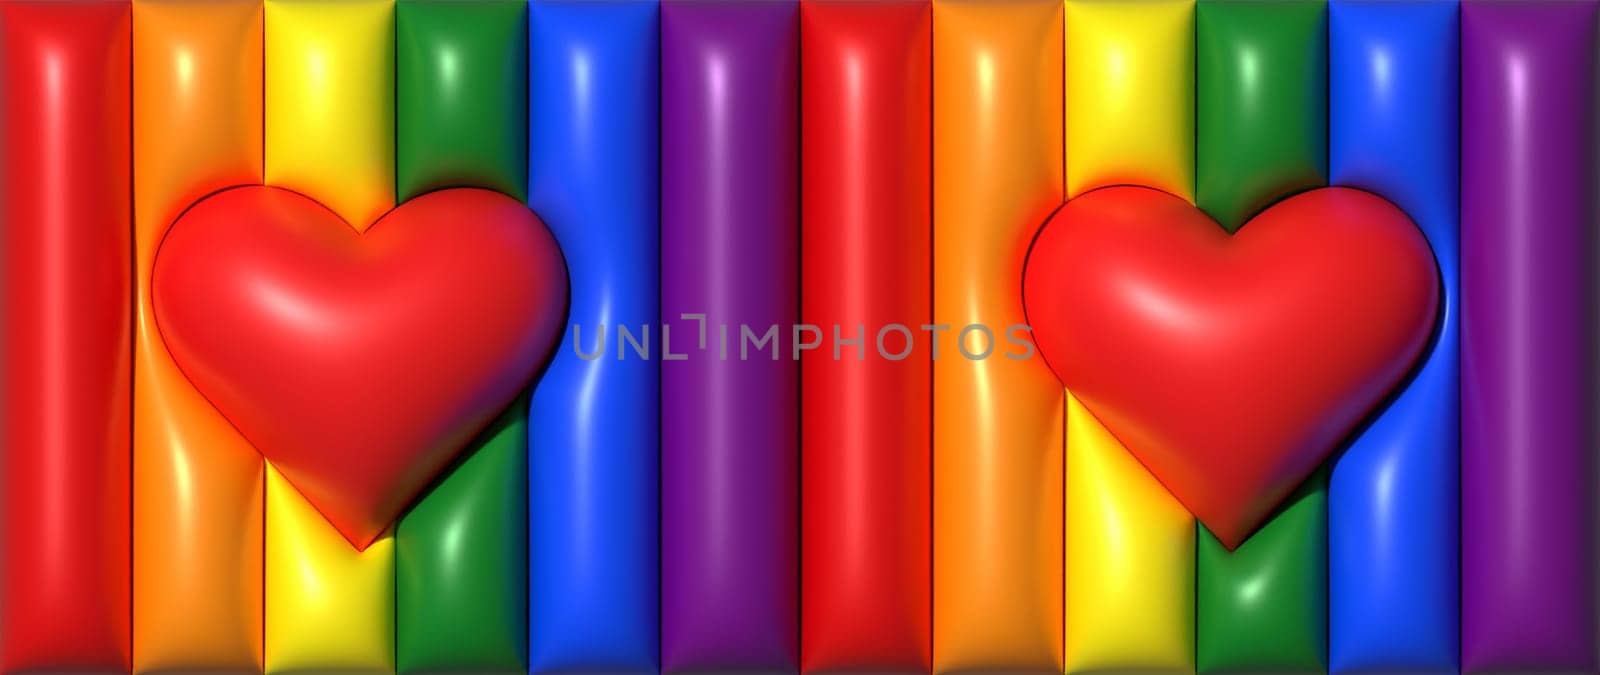 The multi-colored flag is a symbol of LGBT social movements, reflecting the diversity of the LGBT community and the spectrum of human sexuality and gender. 3D rendering illustration by ndanko